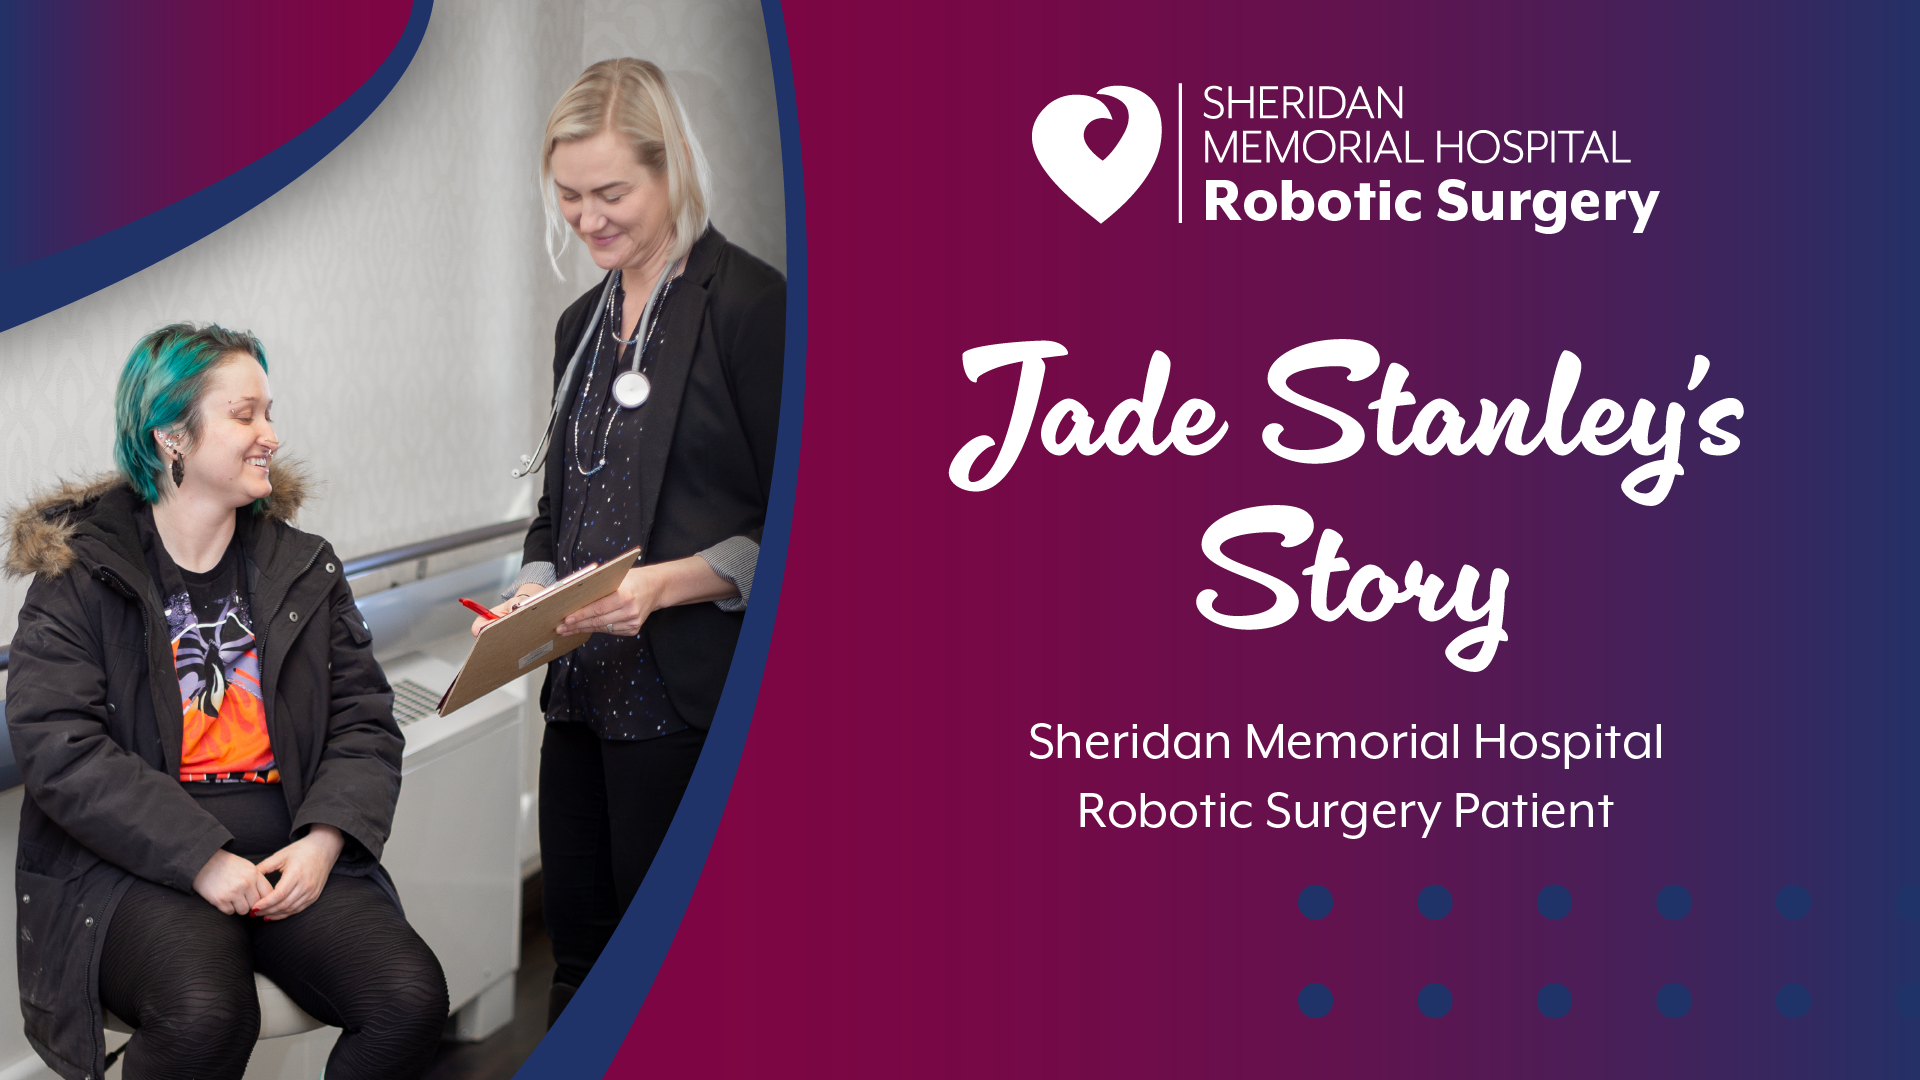 https://www.sheridanhospital.org/wp-content/uploads/2023/05/Jade-Stanley-Patient-Story-Graphic_1920x1080_Enews_1920x1080-Enews.png